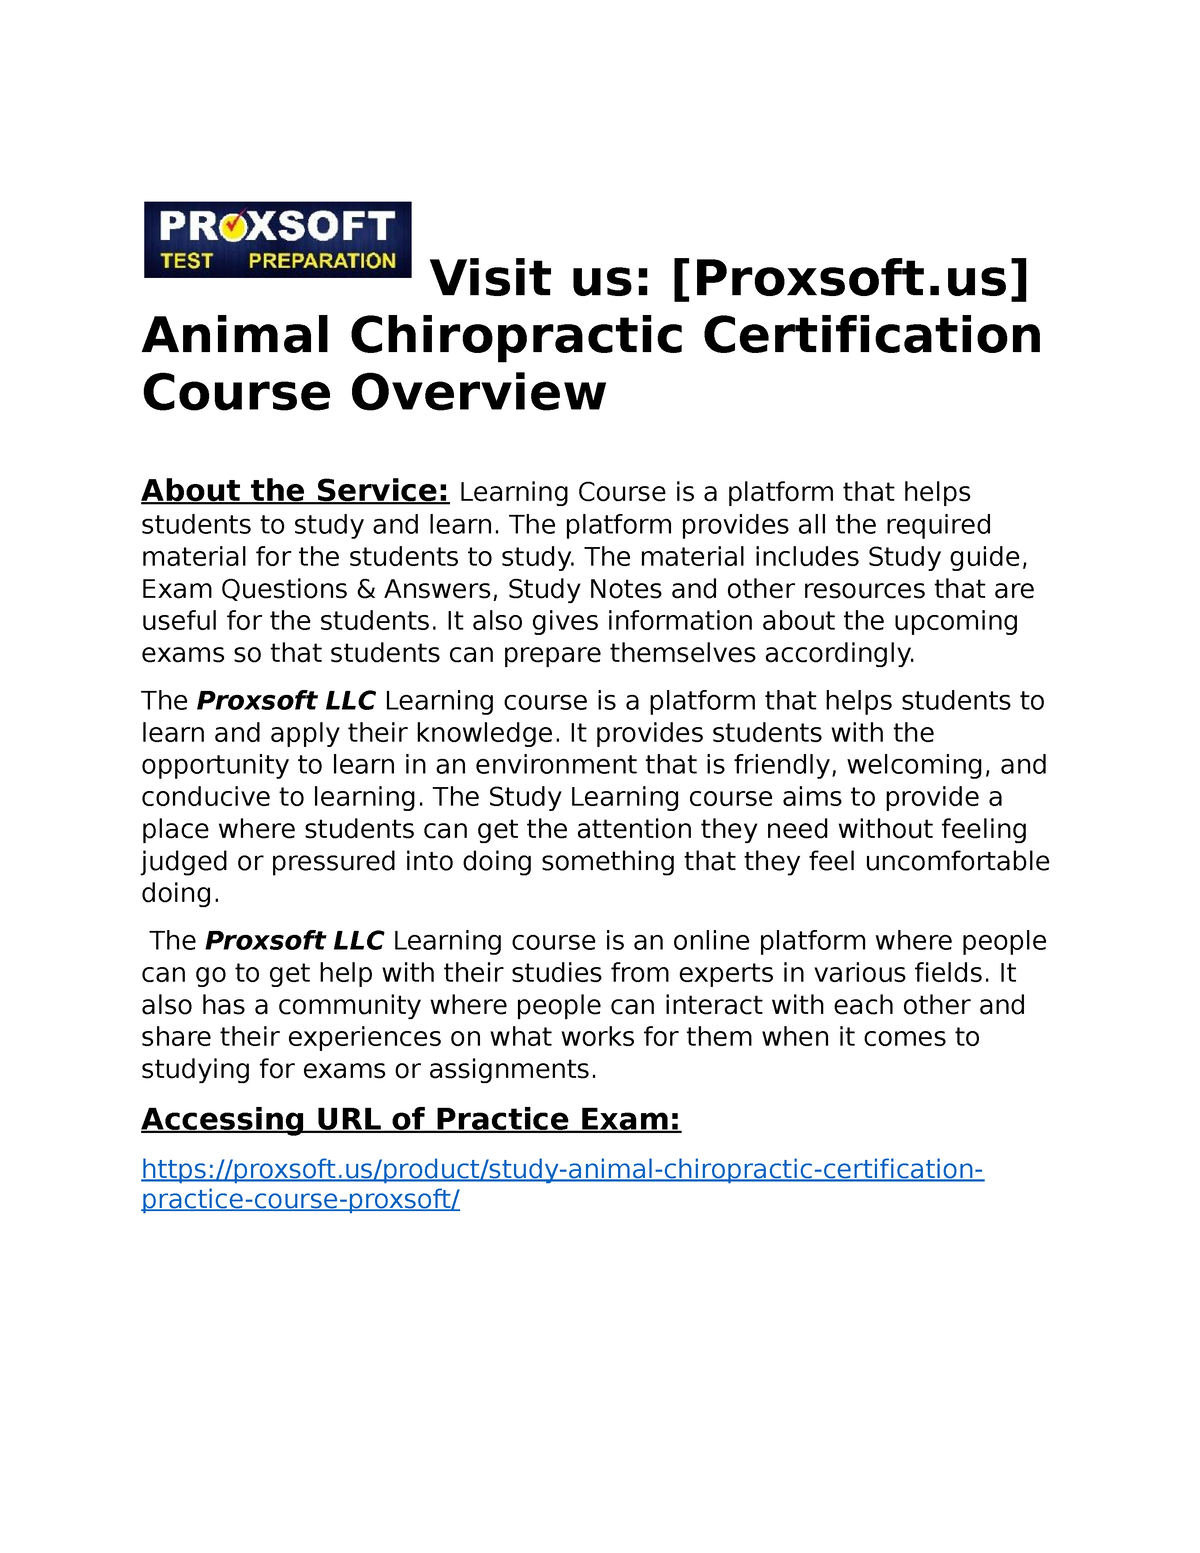 Animal Chiropractic Certification Practice Course Visit us: Proxsoft